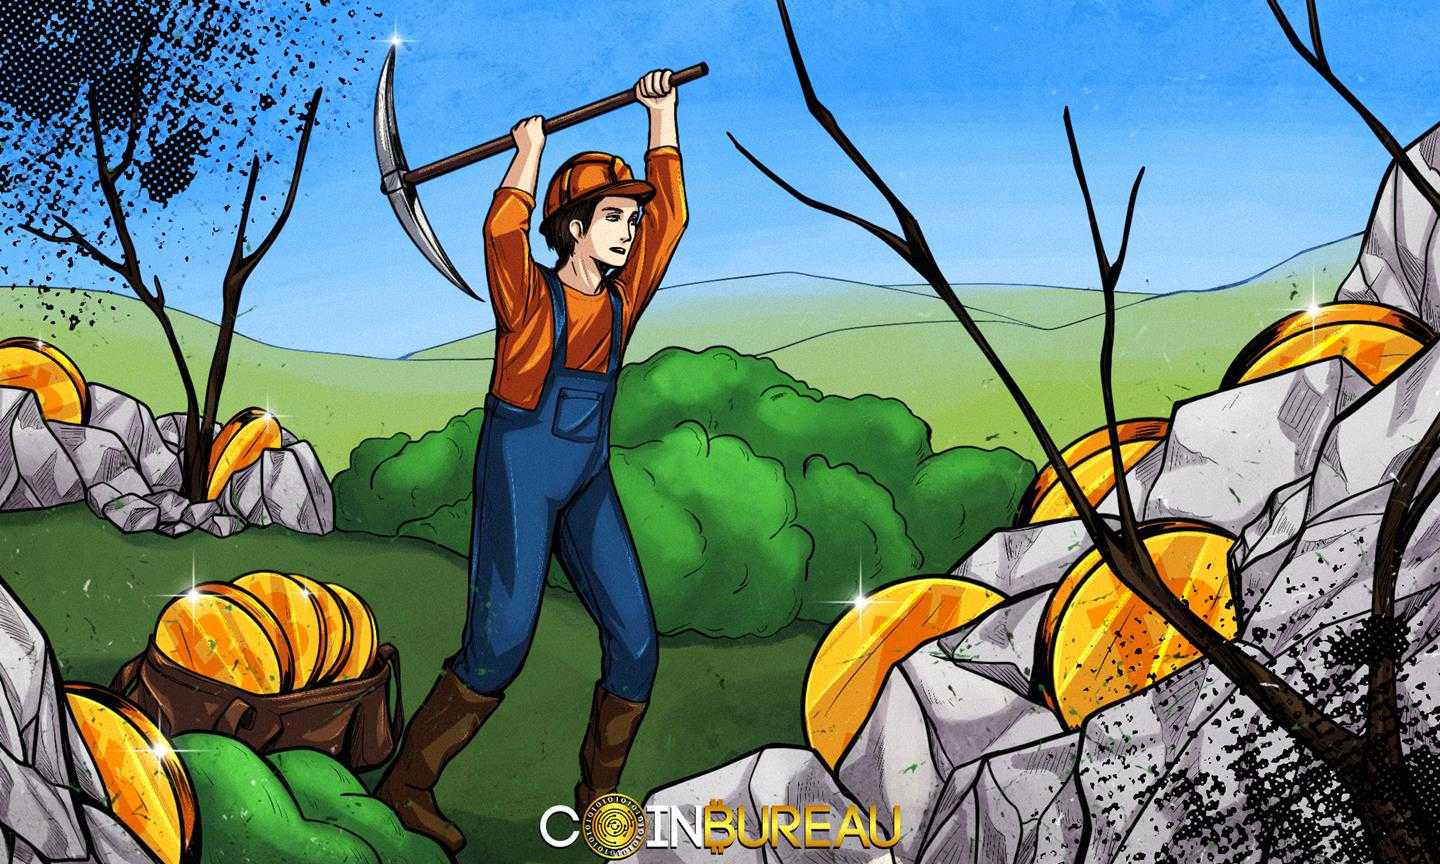 Is Bitcoin Mining REALLY Bad for the Environment?